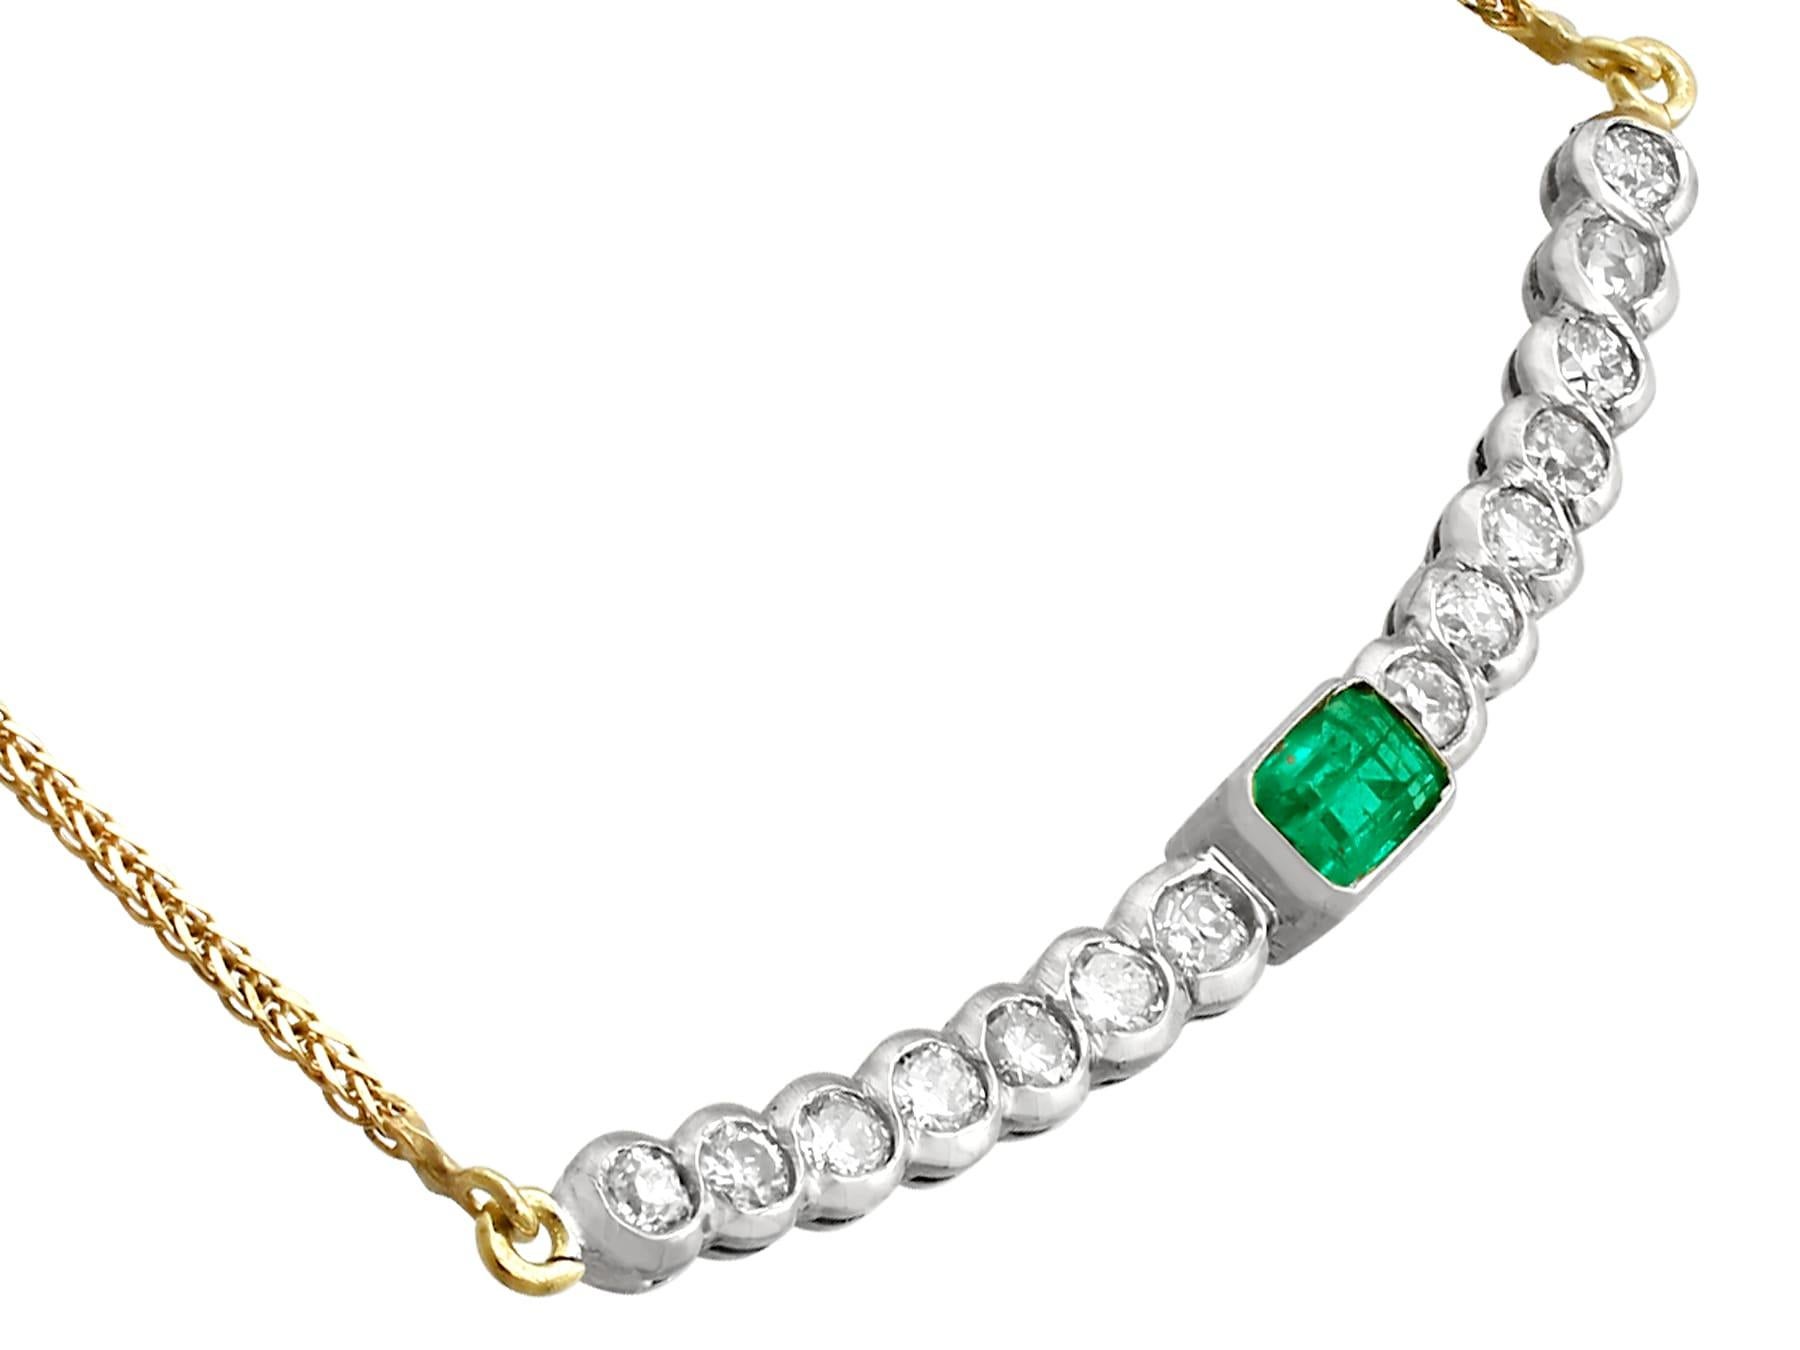 Vintage Emerald and 1.54 Carat Diamond White Gold Necklace In Excellent Condition For Sale In Jesmond, Newcastle Upon Tyne